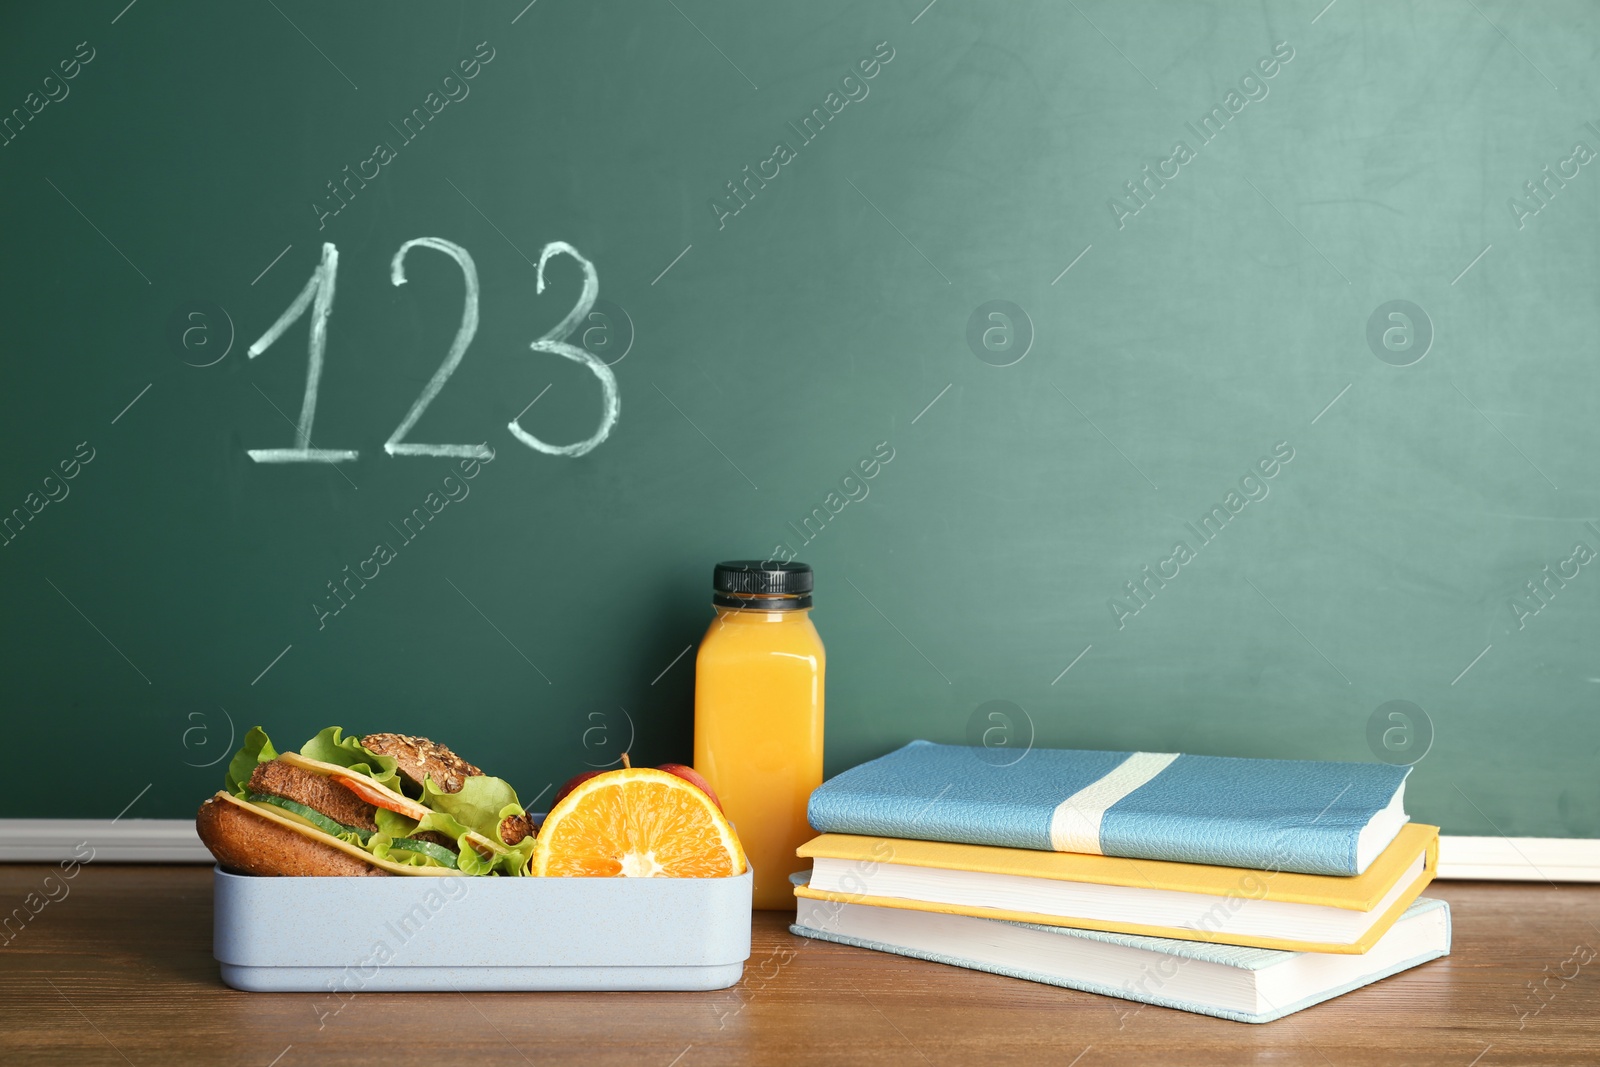 Photo of Healthy food for school child and stationery on table near chalkboard with written numbers